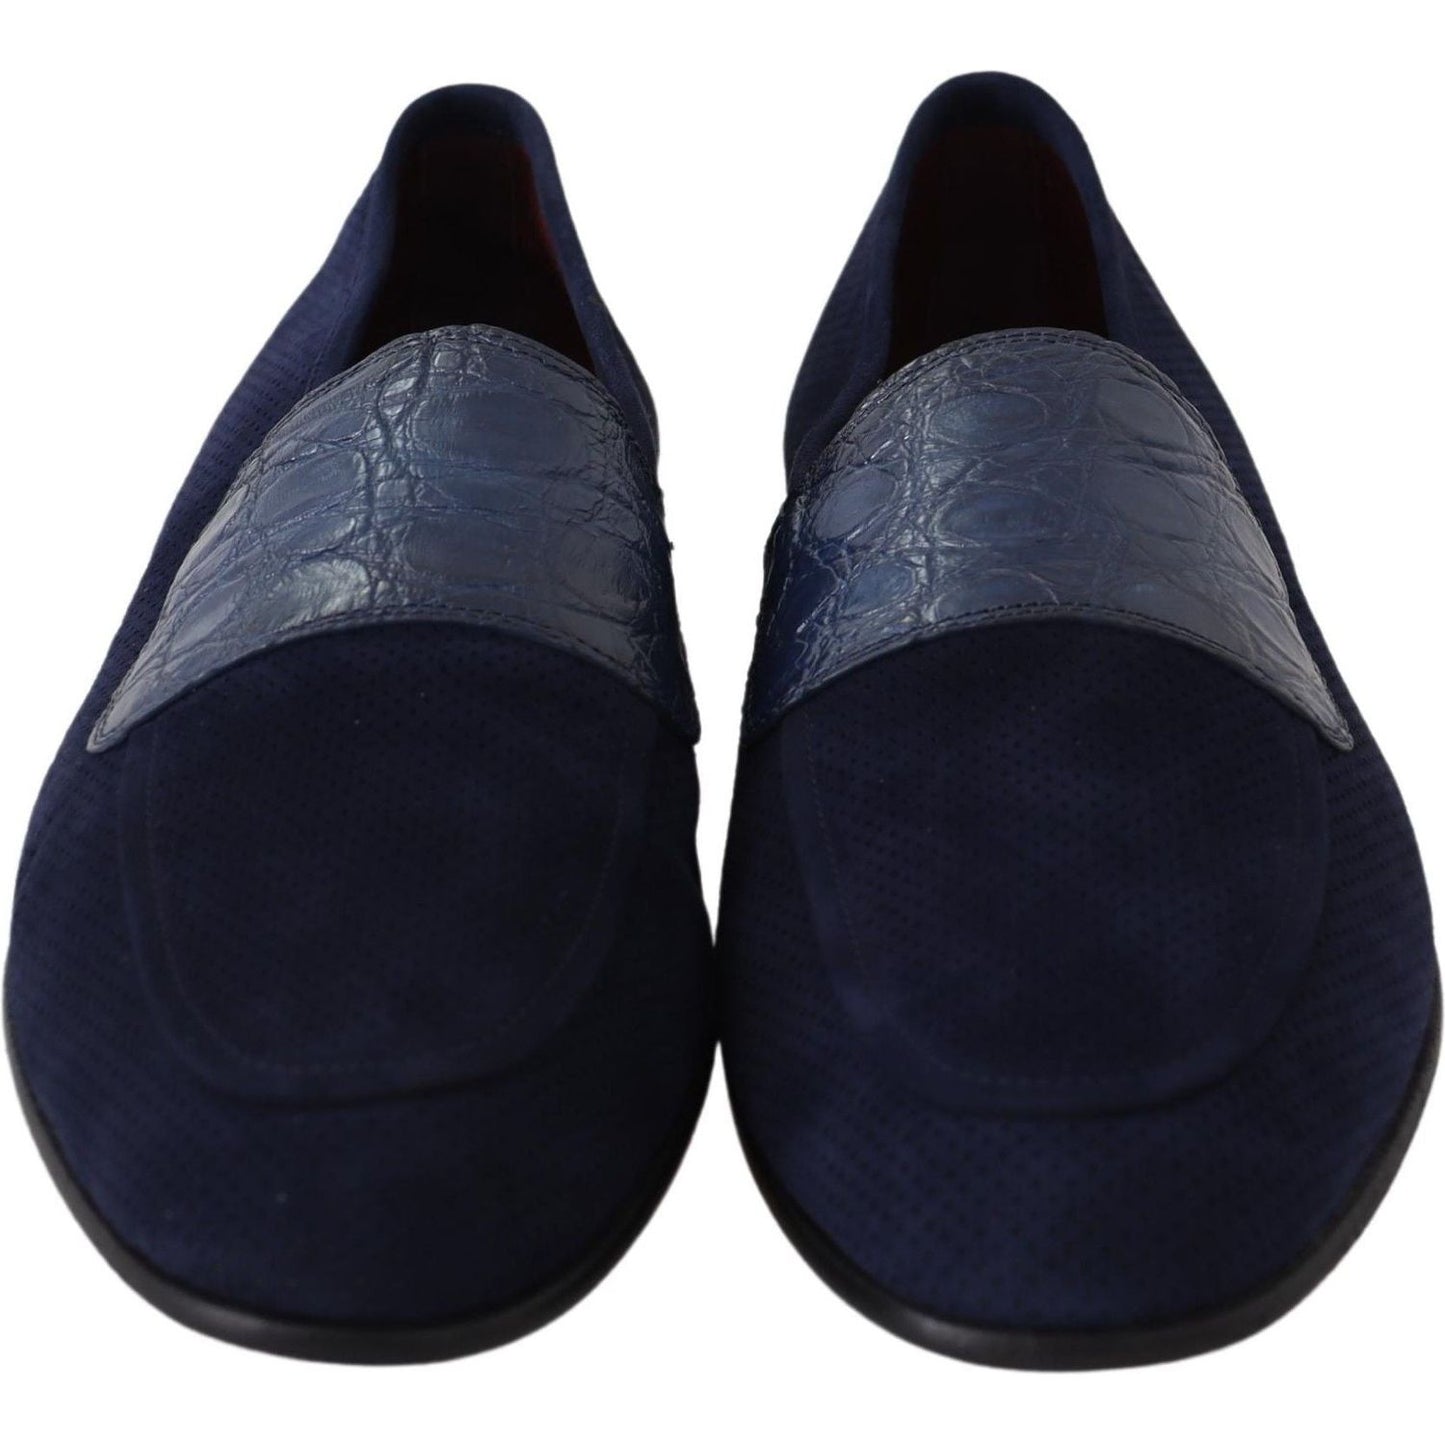 Dolce & Gabbana Elegant Blue Suede Leather Loafers blue-suede-caiman-loafers-slippers-shoes IMG_1588-3a3dab4e-8c5.jpg